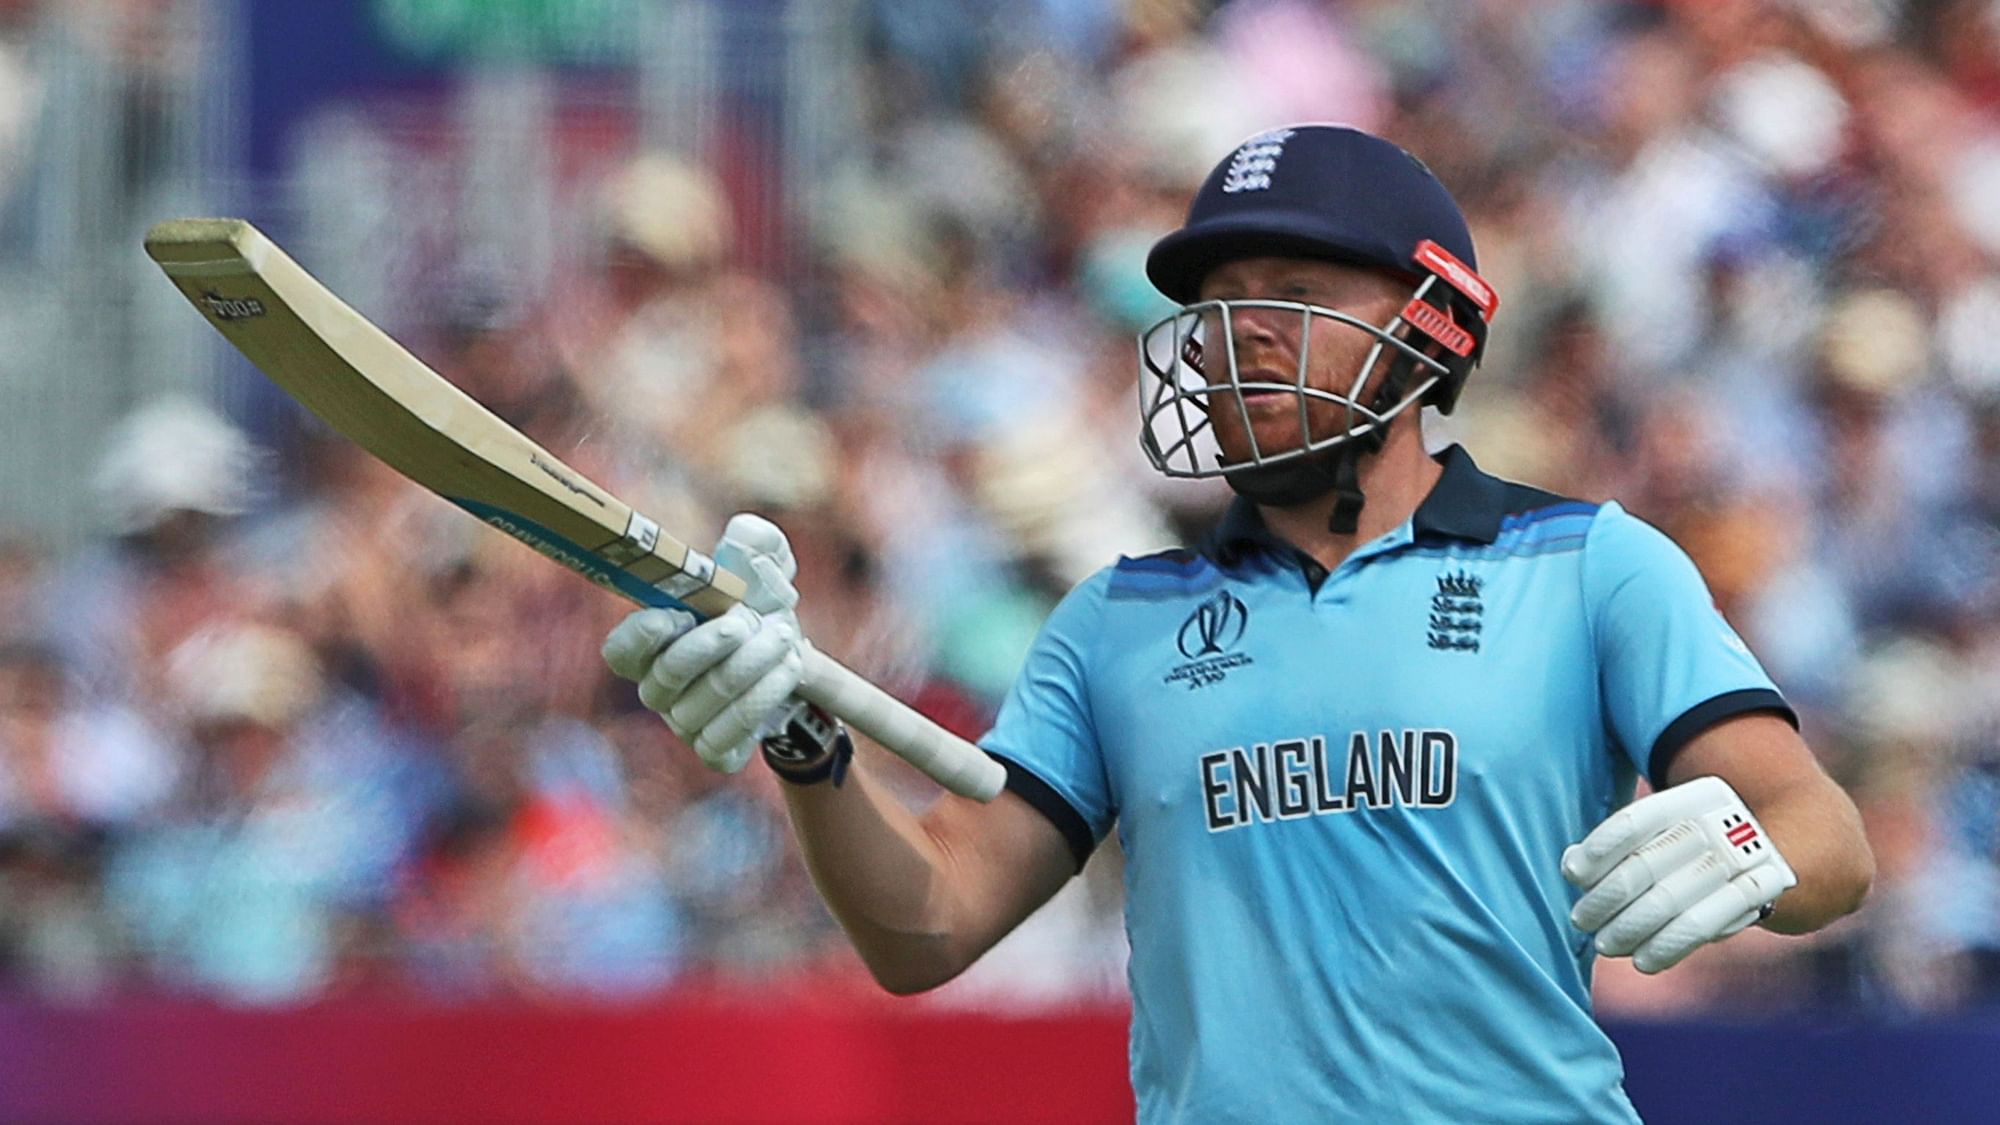 There’s nothing “negative and pathetic” about Jonny Bairstow’s batting at the Cricket World Cup.